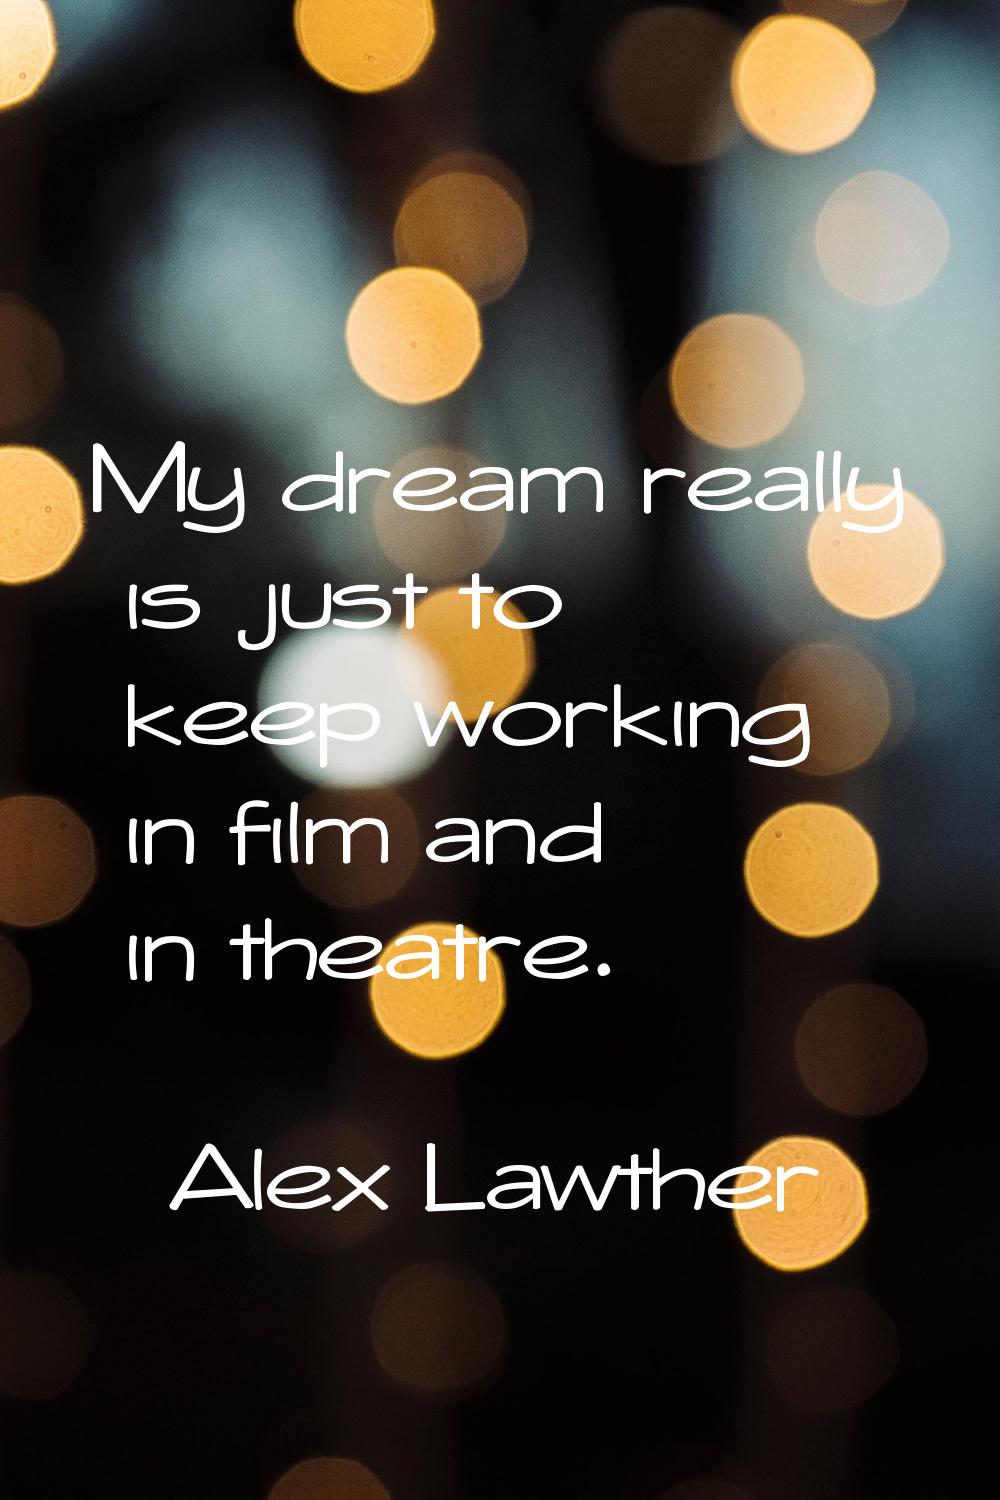 My dream really is just to keep working in film and in theatre.